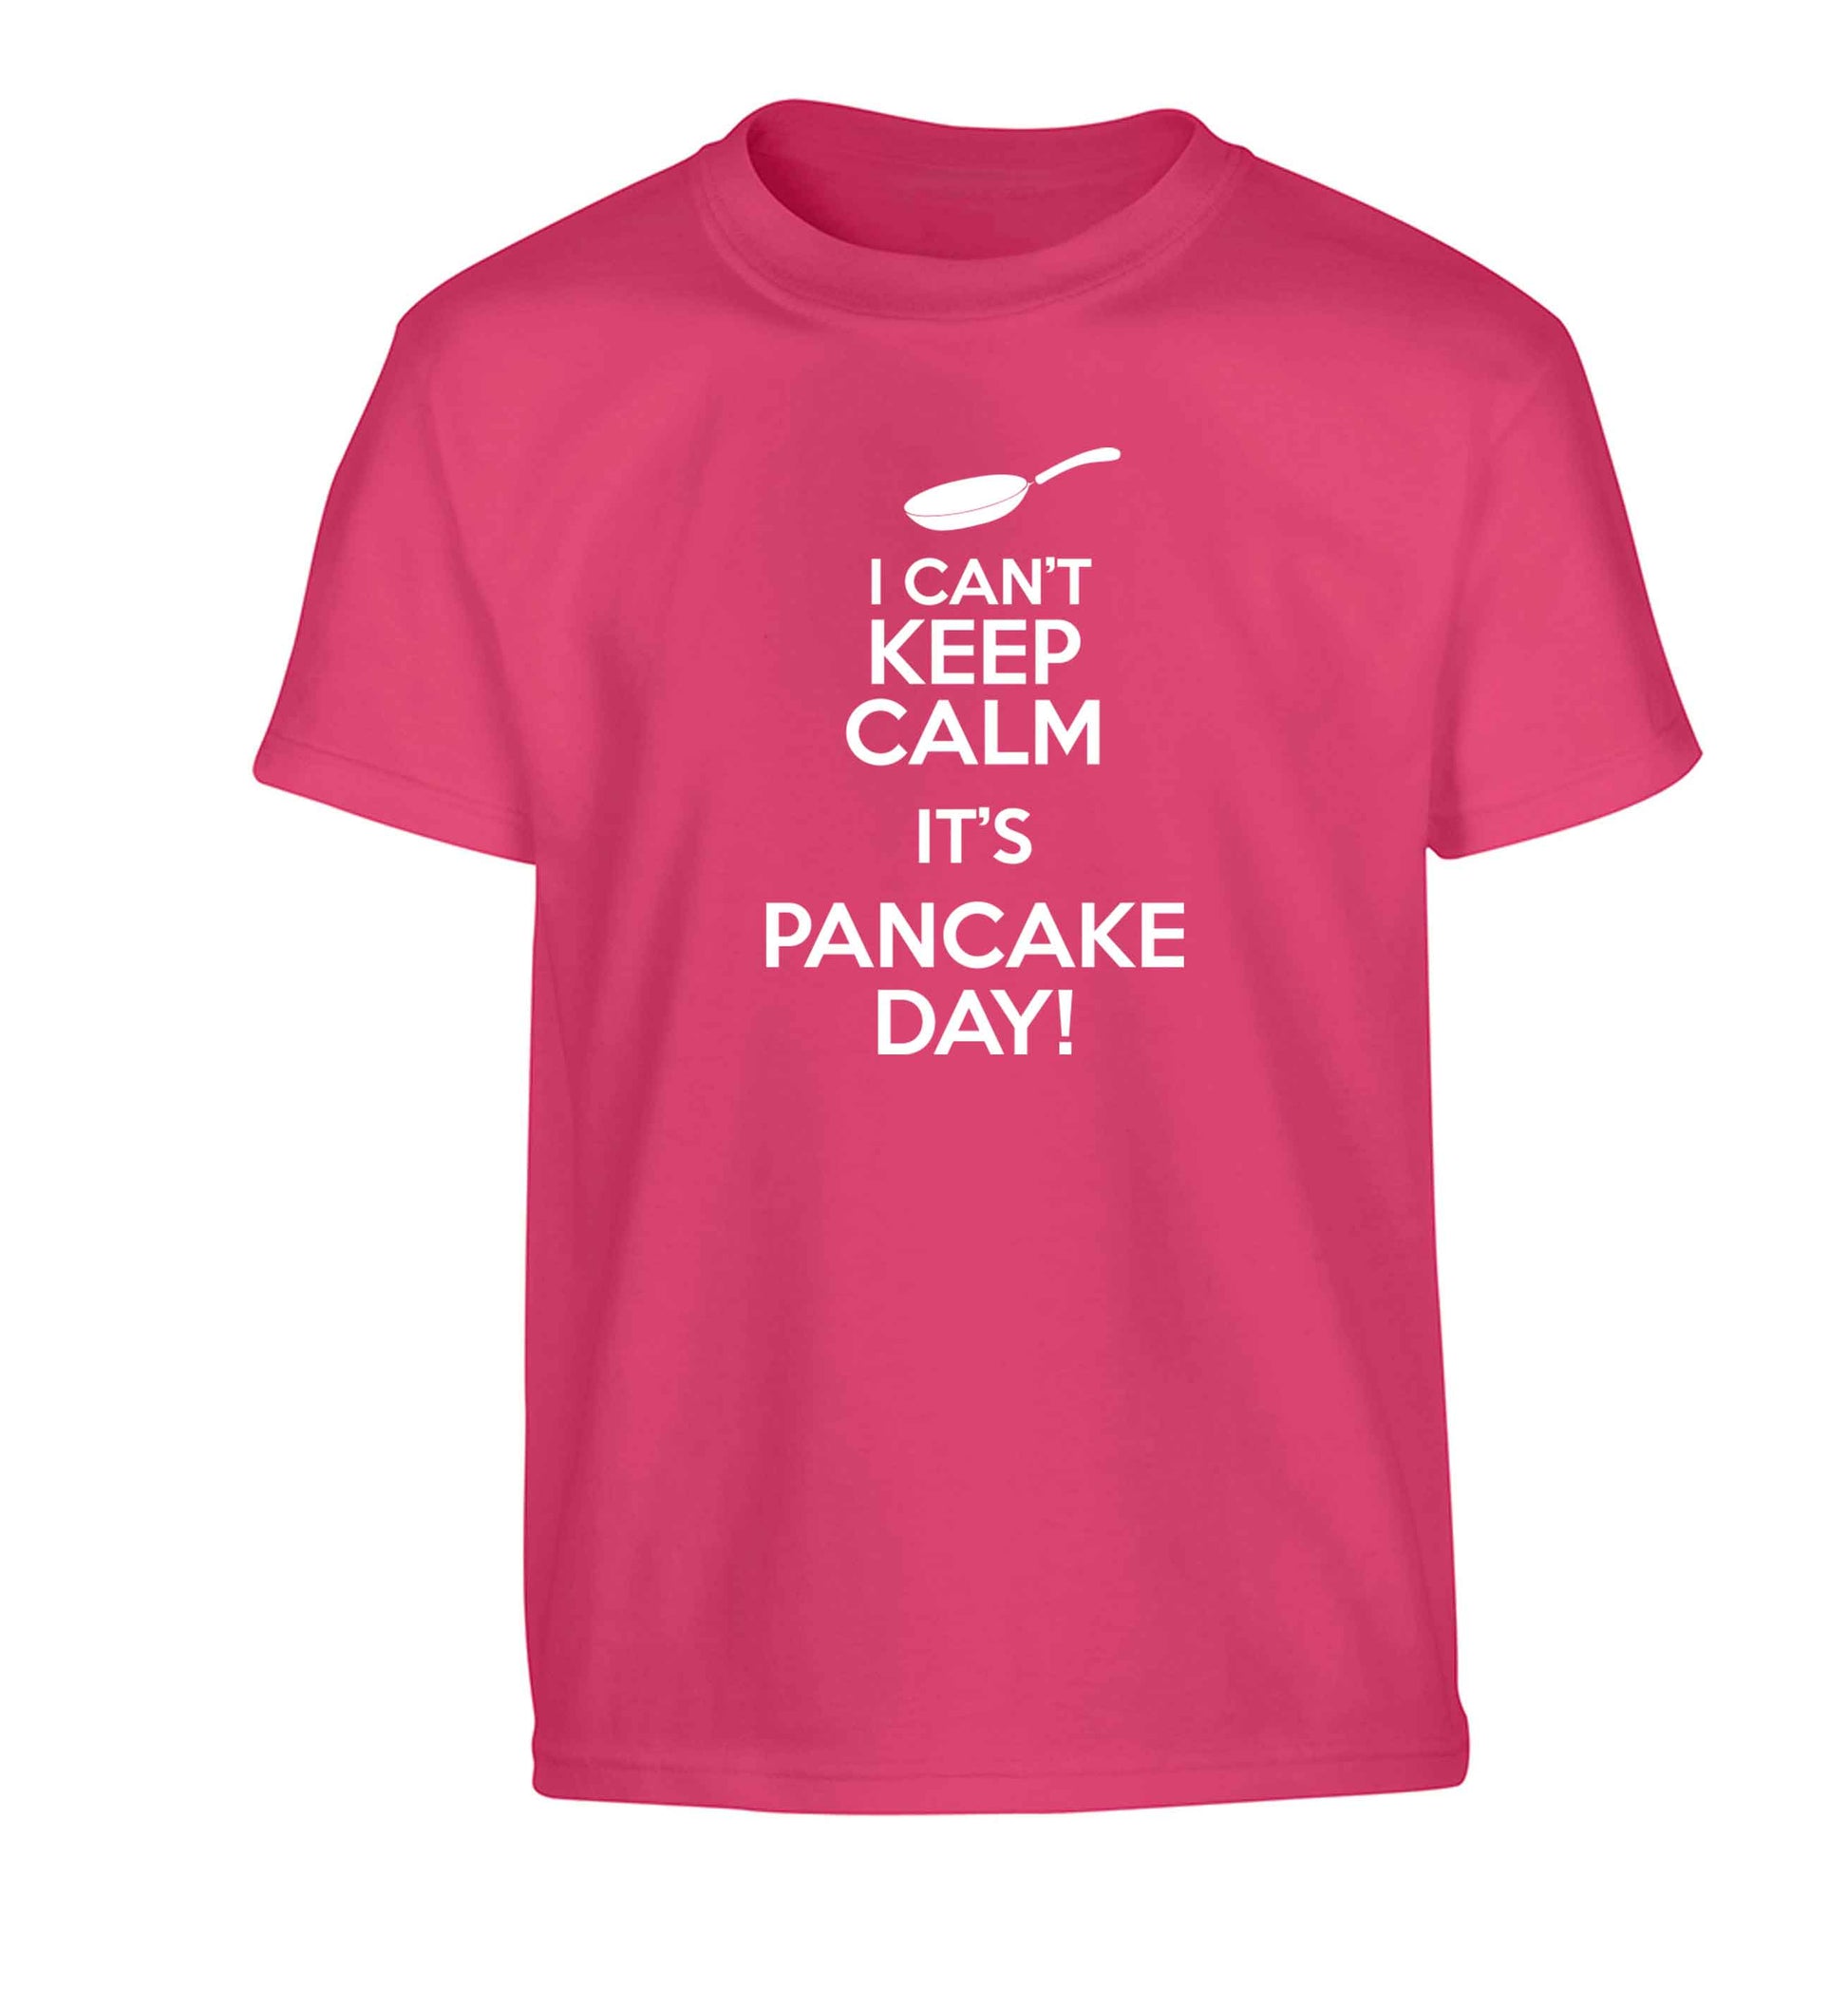 I can't keep calm it's pancake day! Children's pink Tshirt 12-13 Years